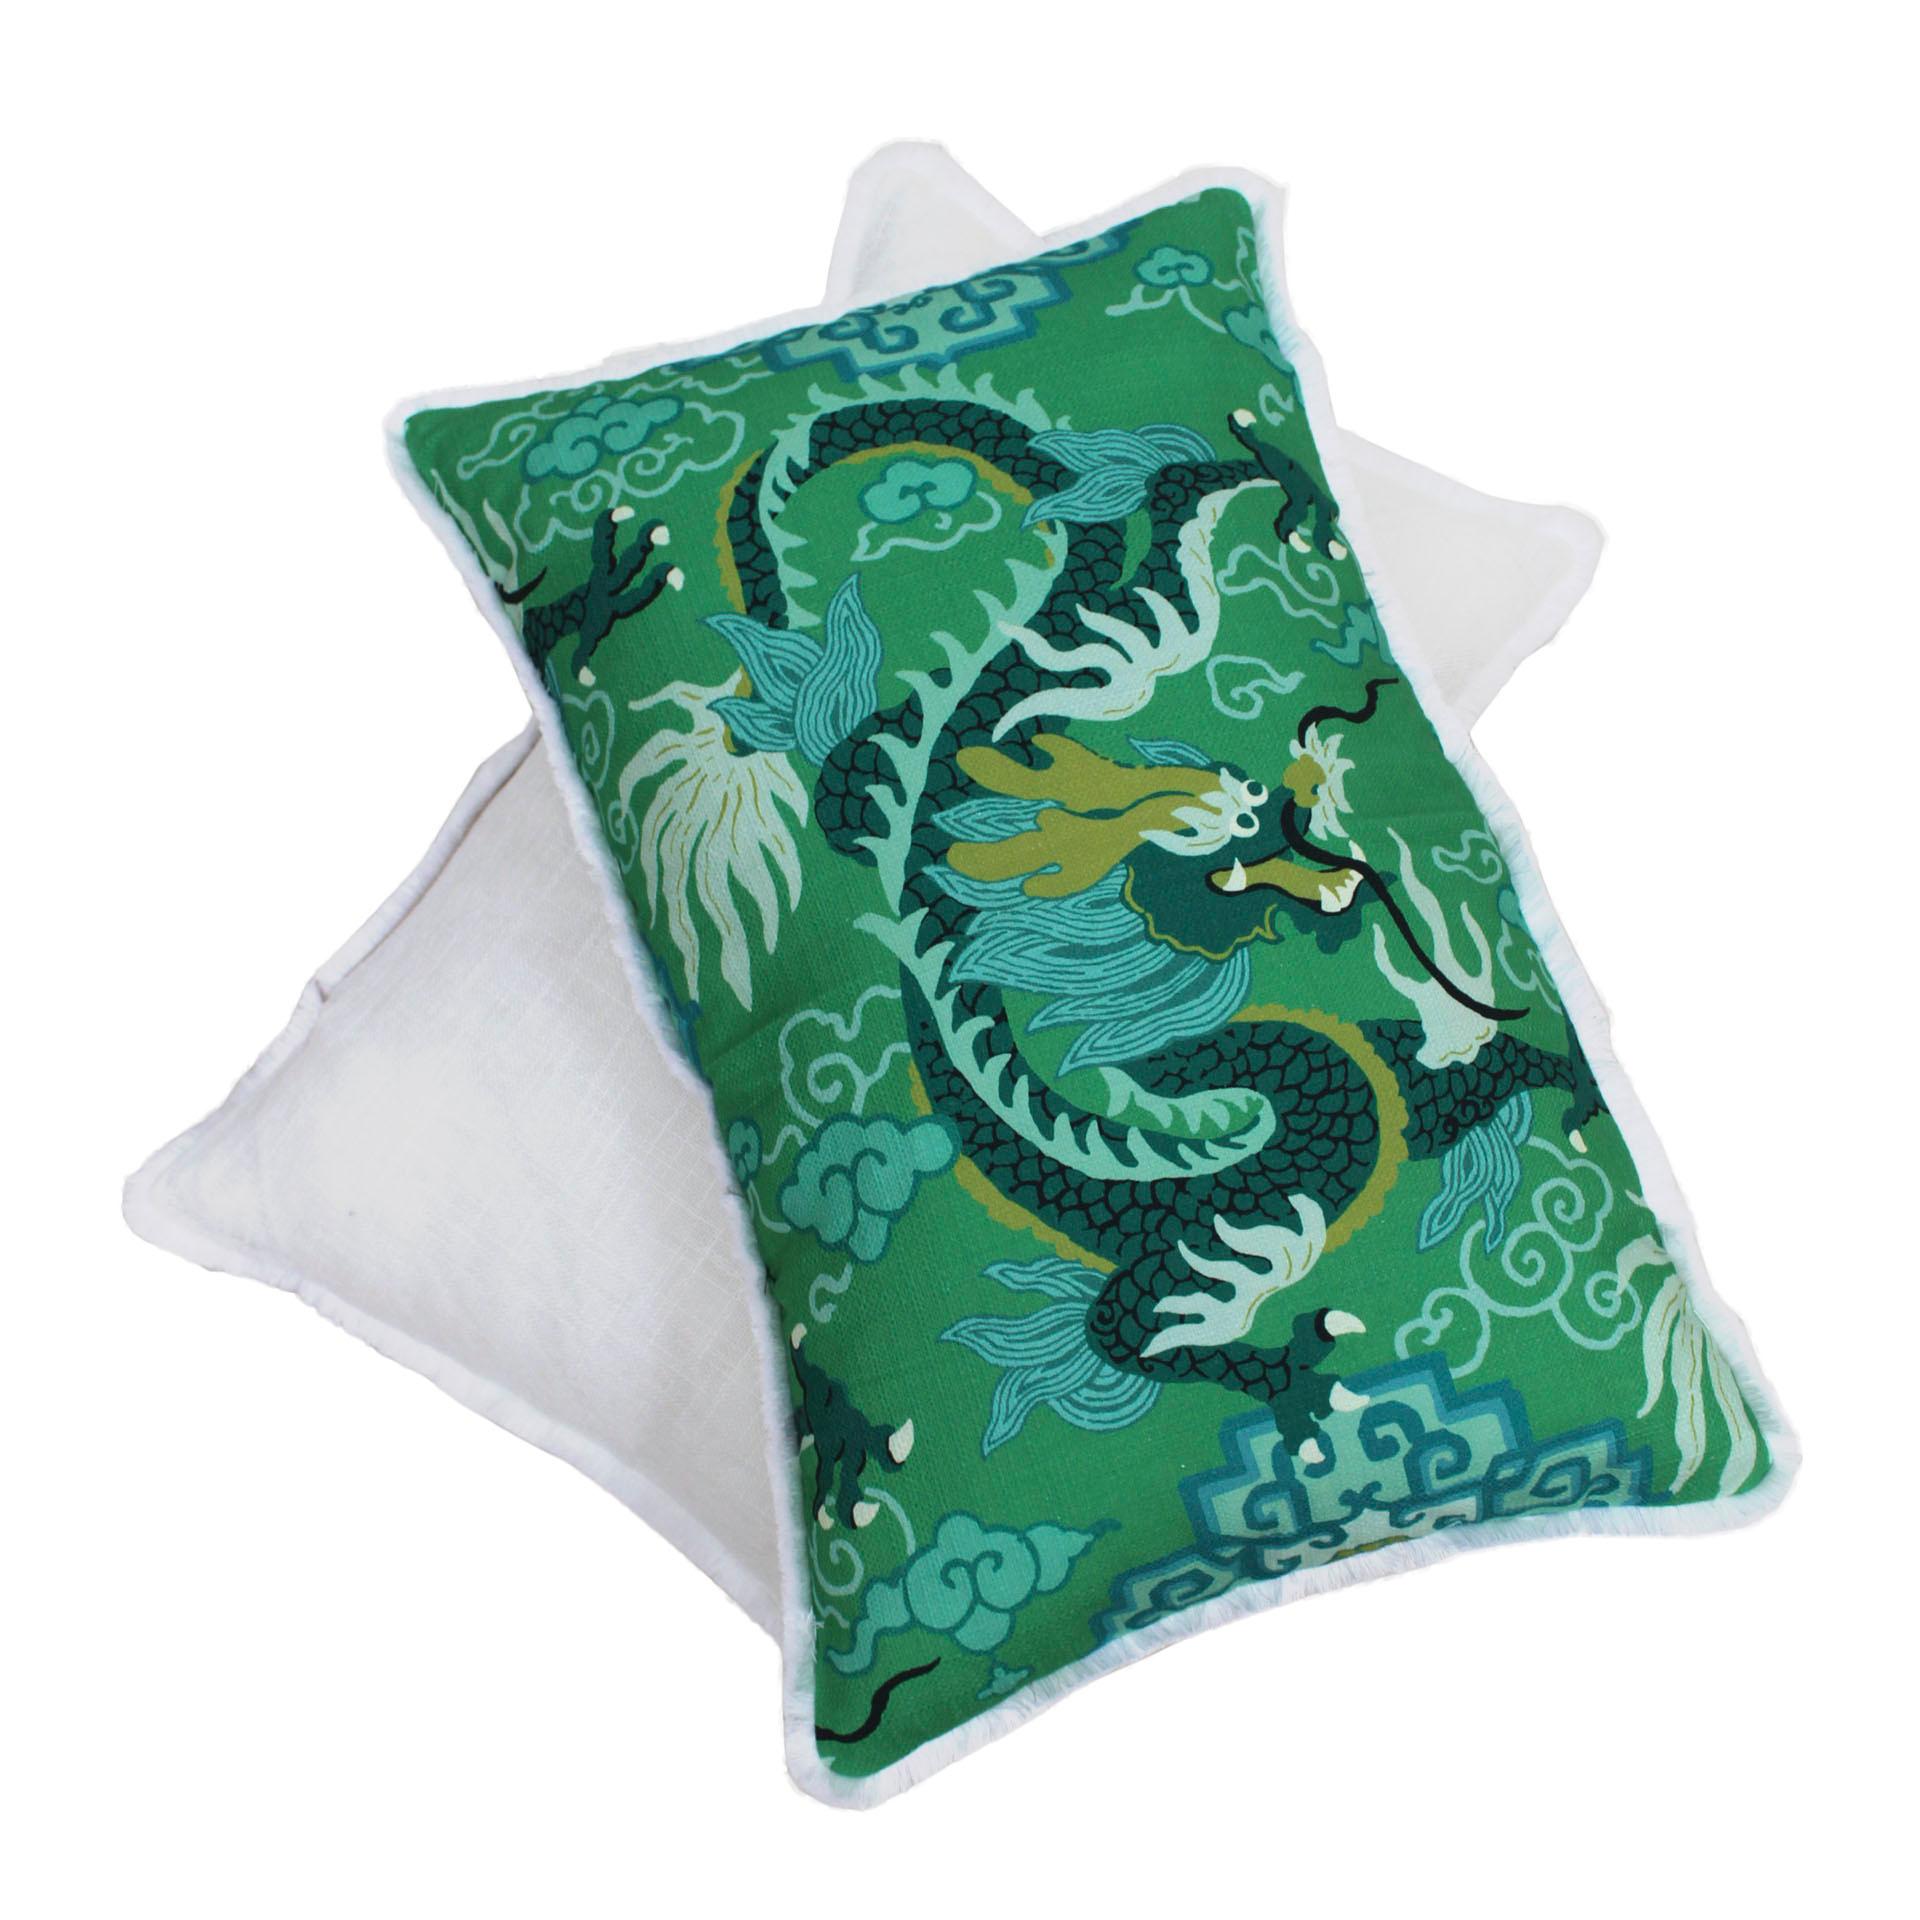 Dragon printed cushions made of cotton fabric, green tones. Finished with fringes and zip at the back. 

Every item LA Studio offers is checked by our team of 10 craftsmen in our in-house workshop. Special restoration or reupholstery requests can be